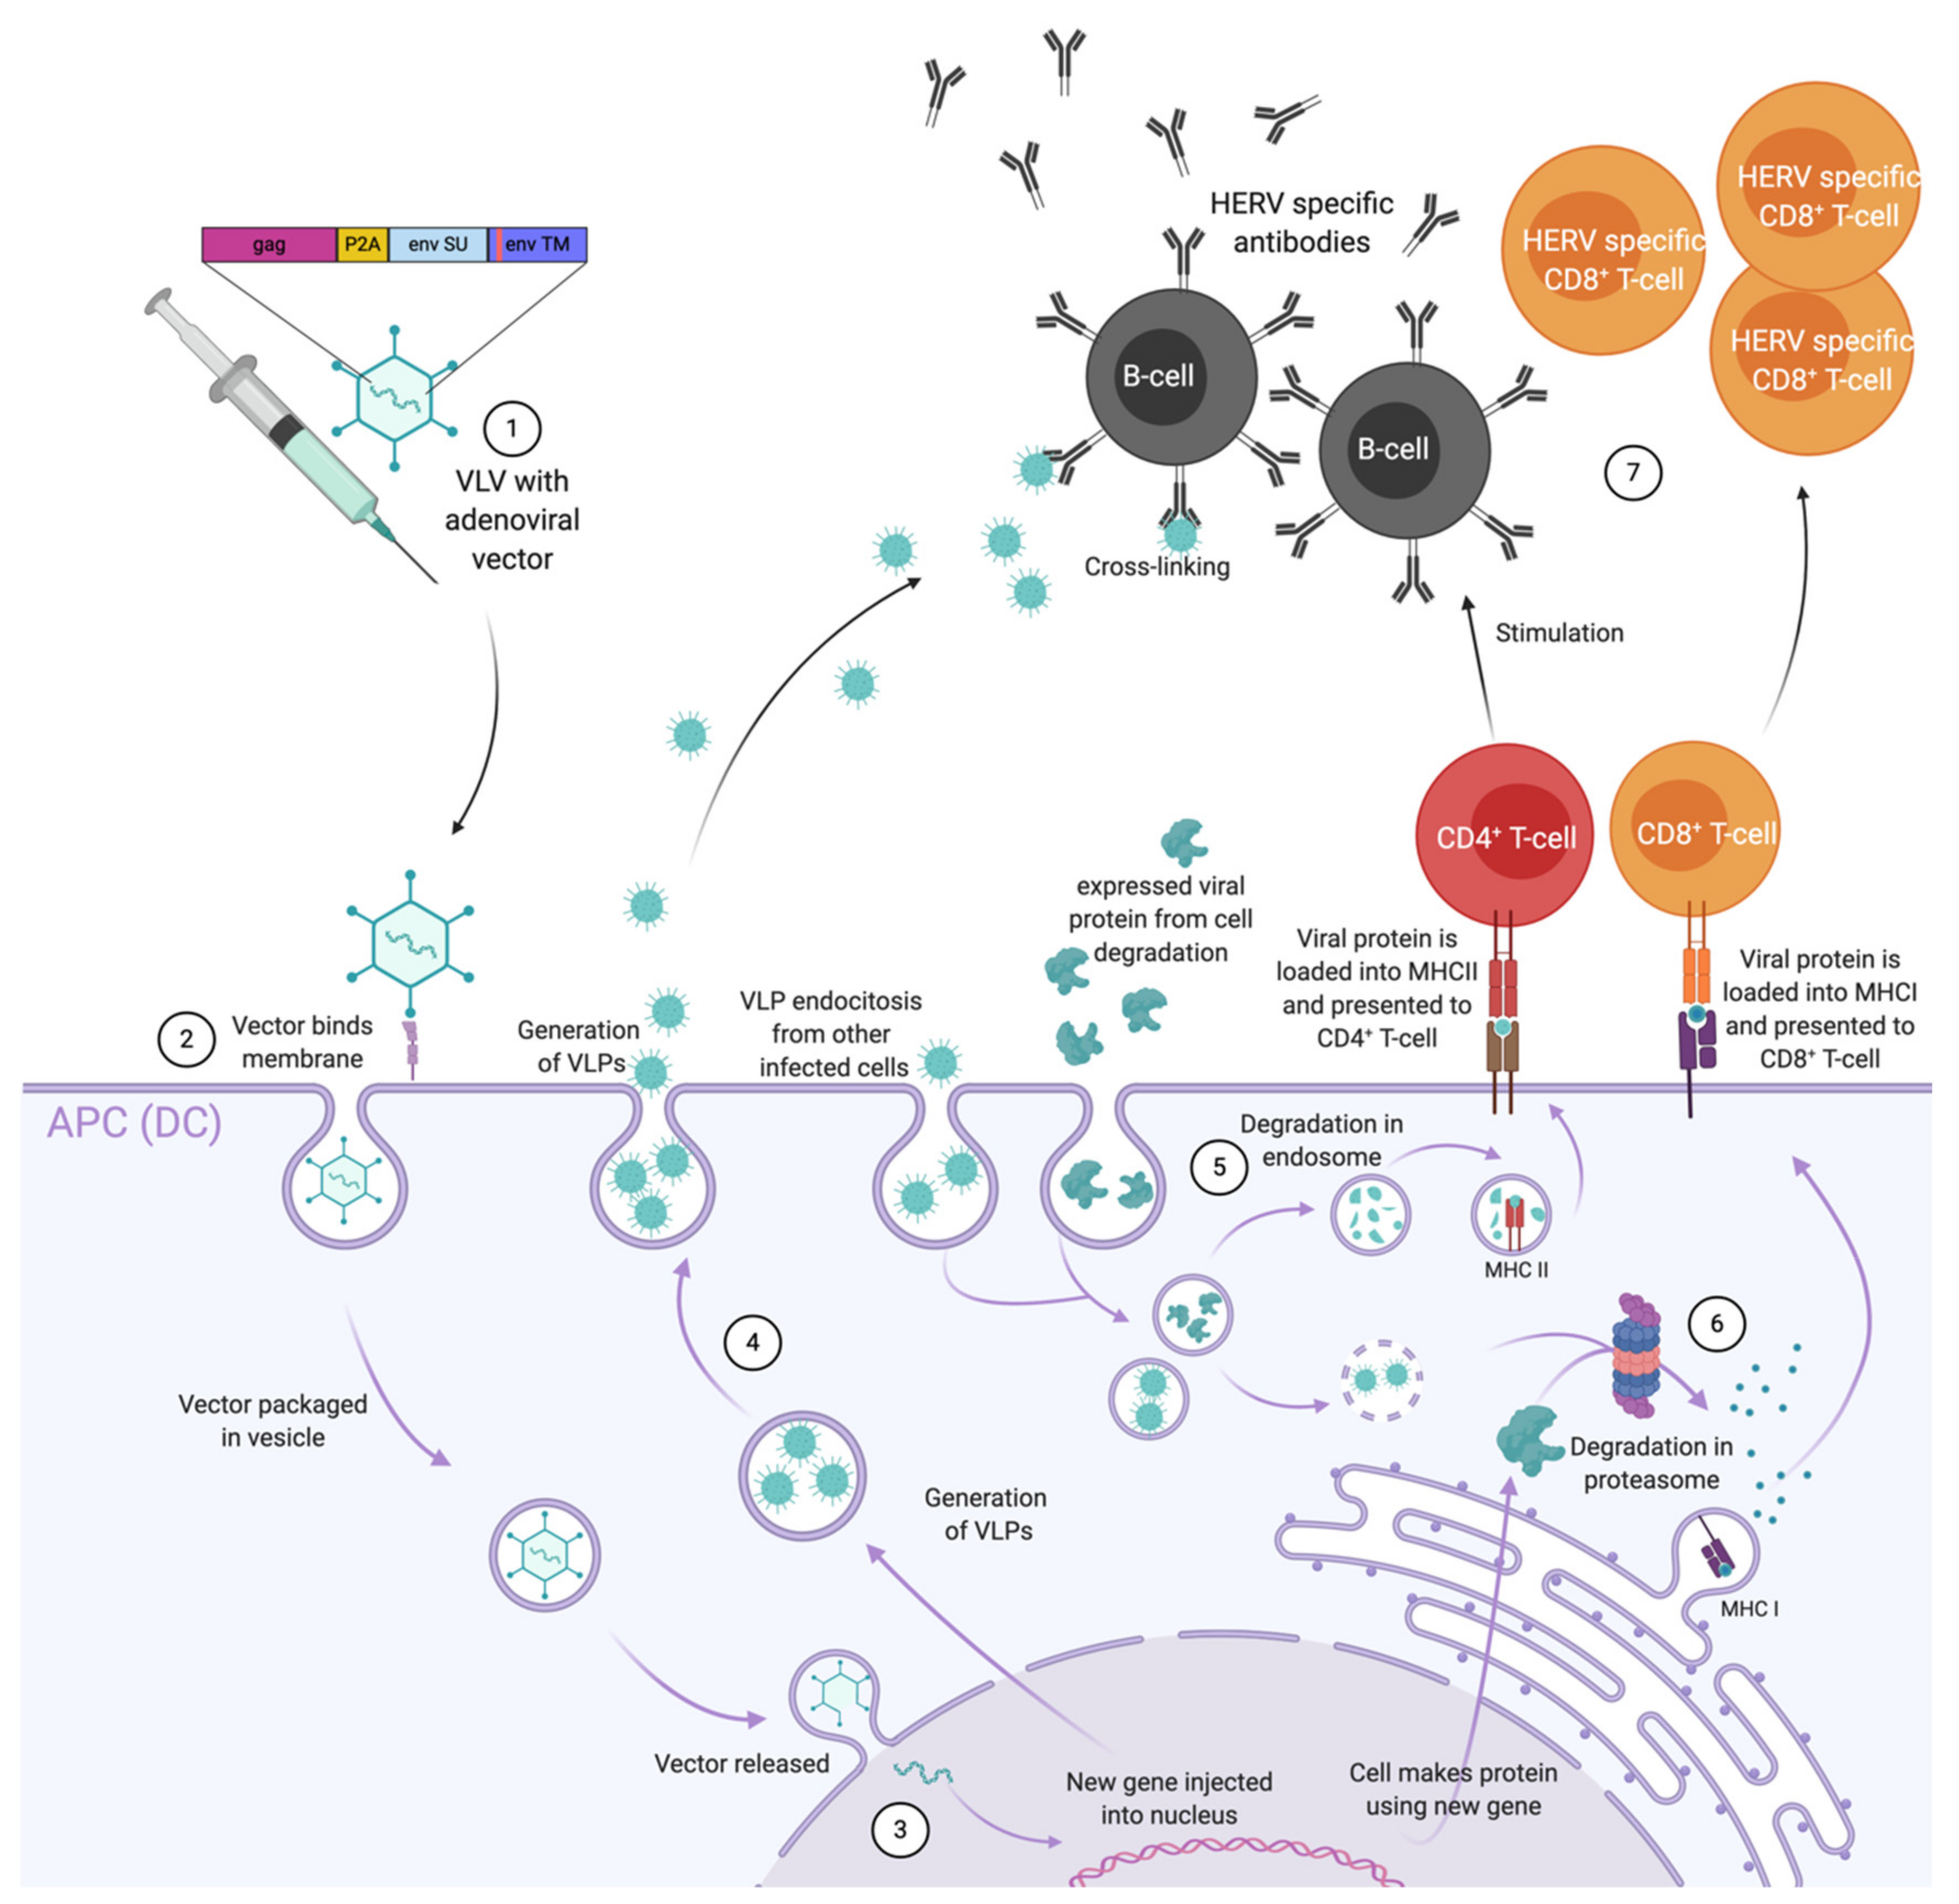 COVID-19 activates endogenous retroviruses within our genome